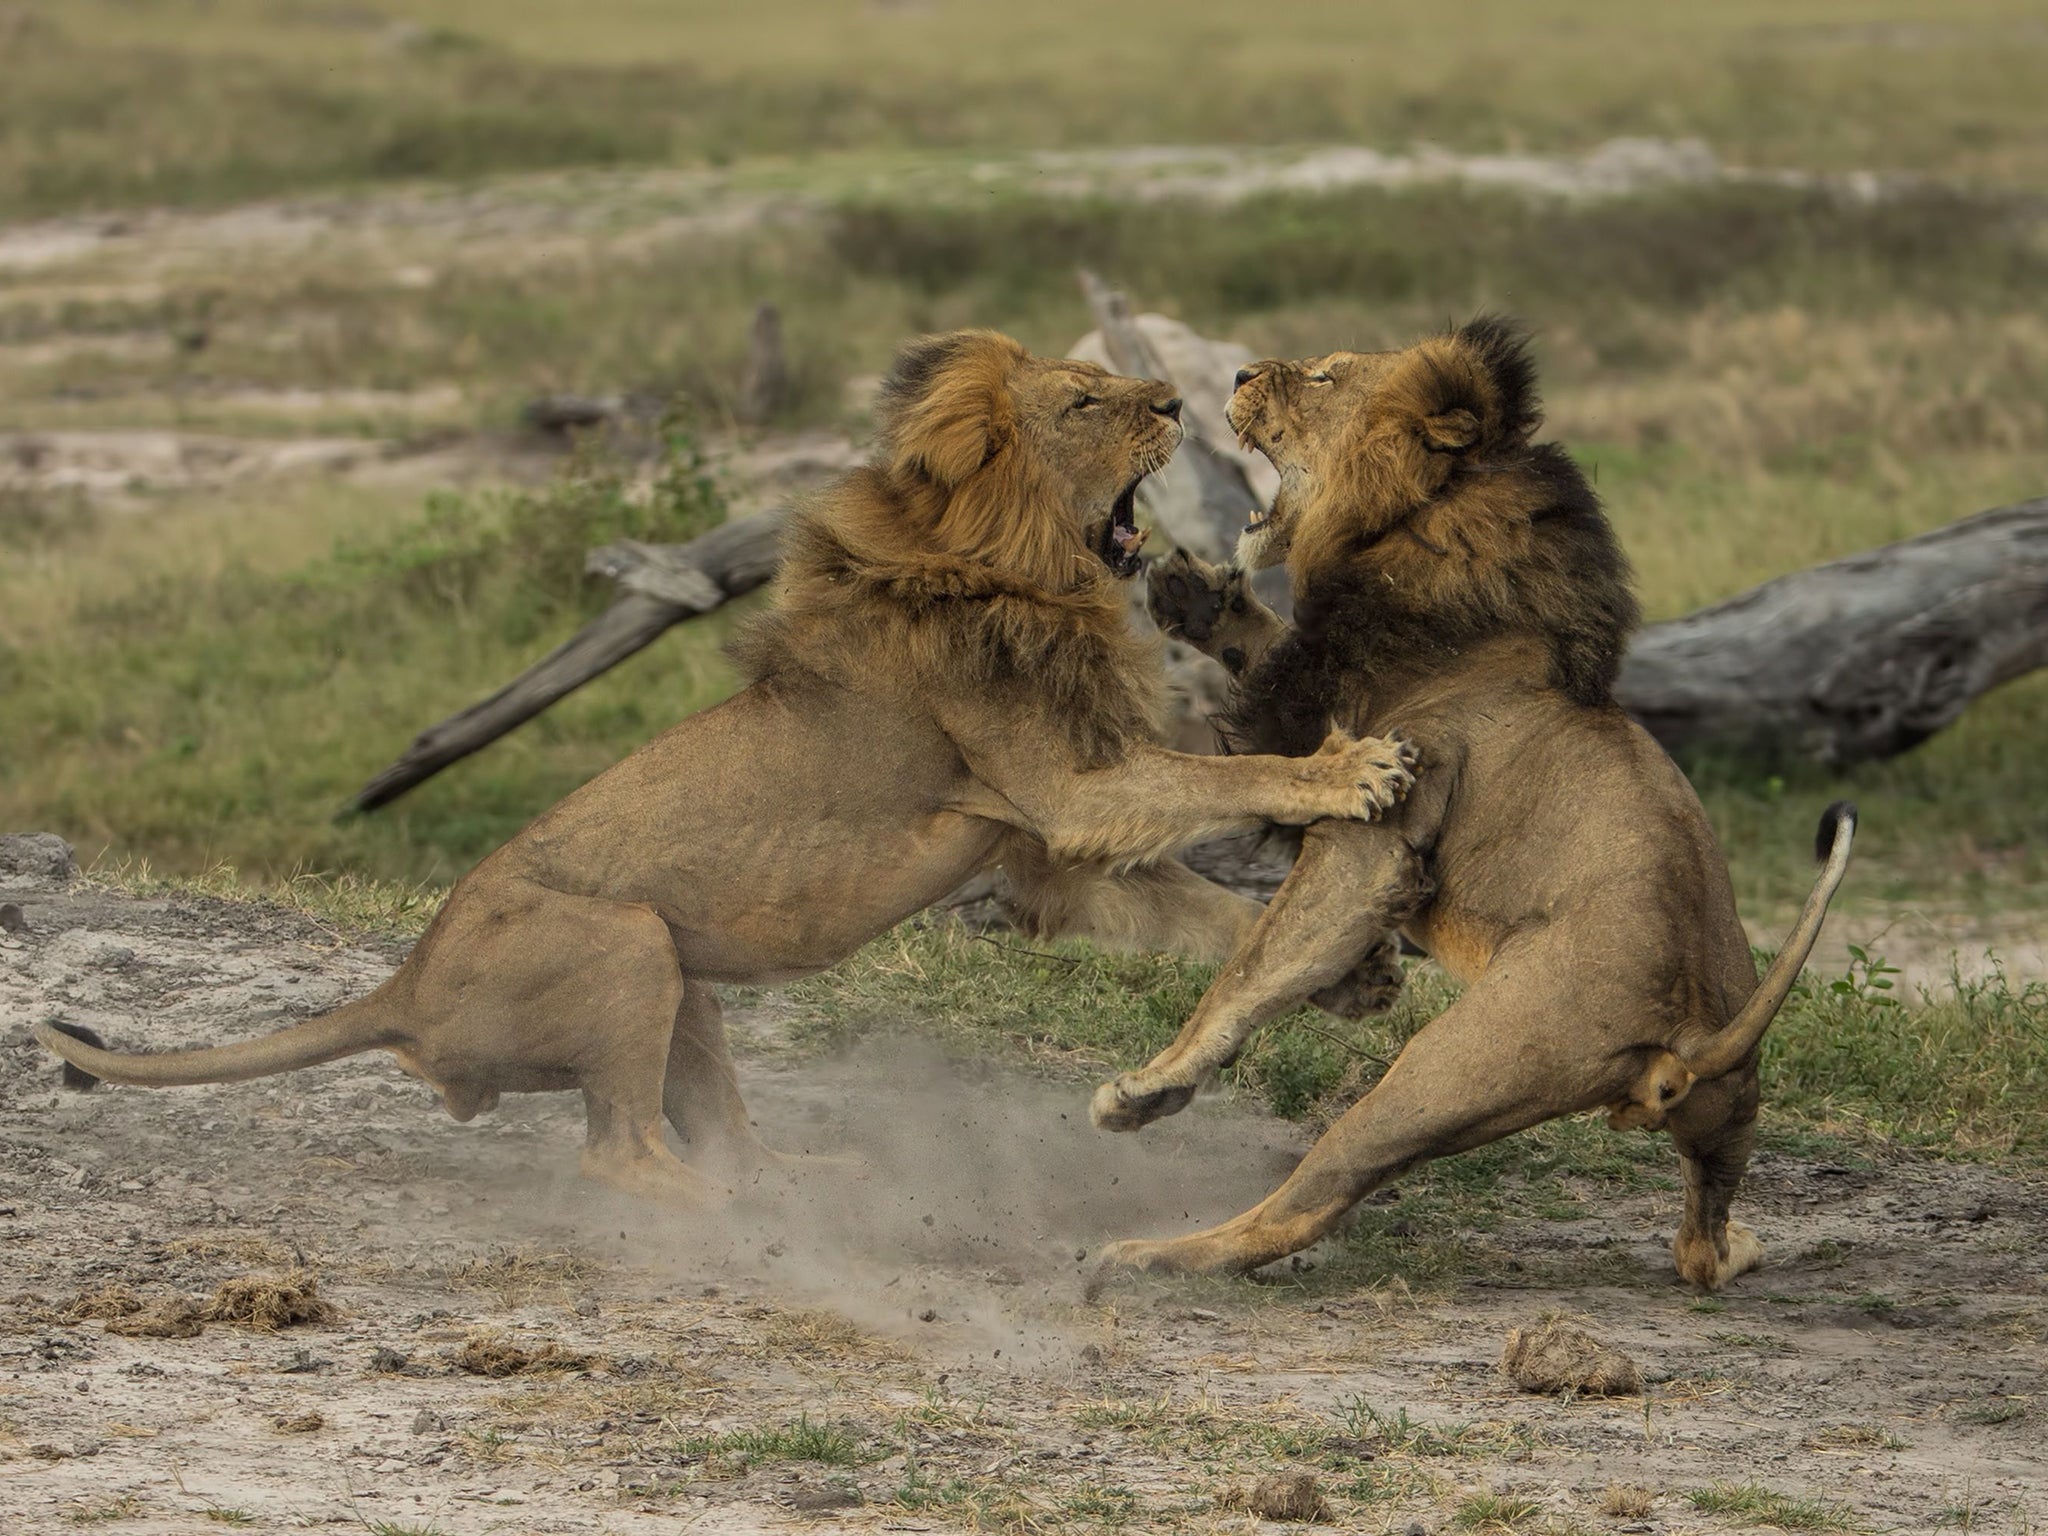 Jericho the lion, left, fighting with his brother, Cecil, in Hwange National Park, Zimbabwe, last year